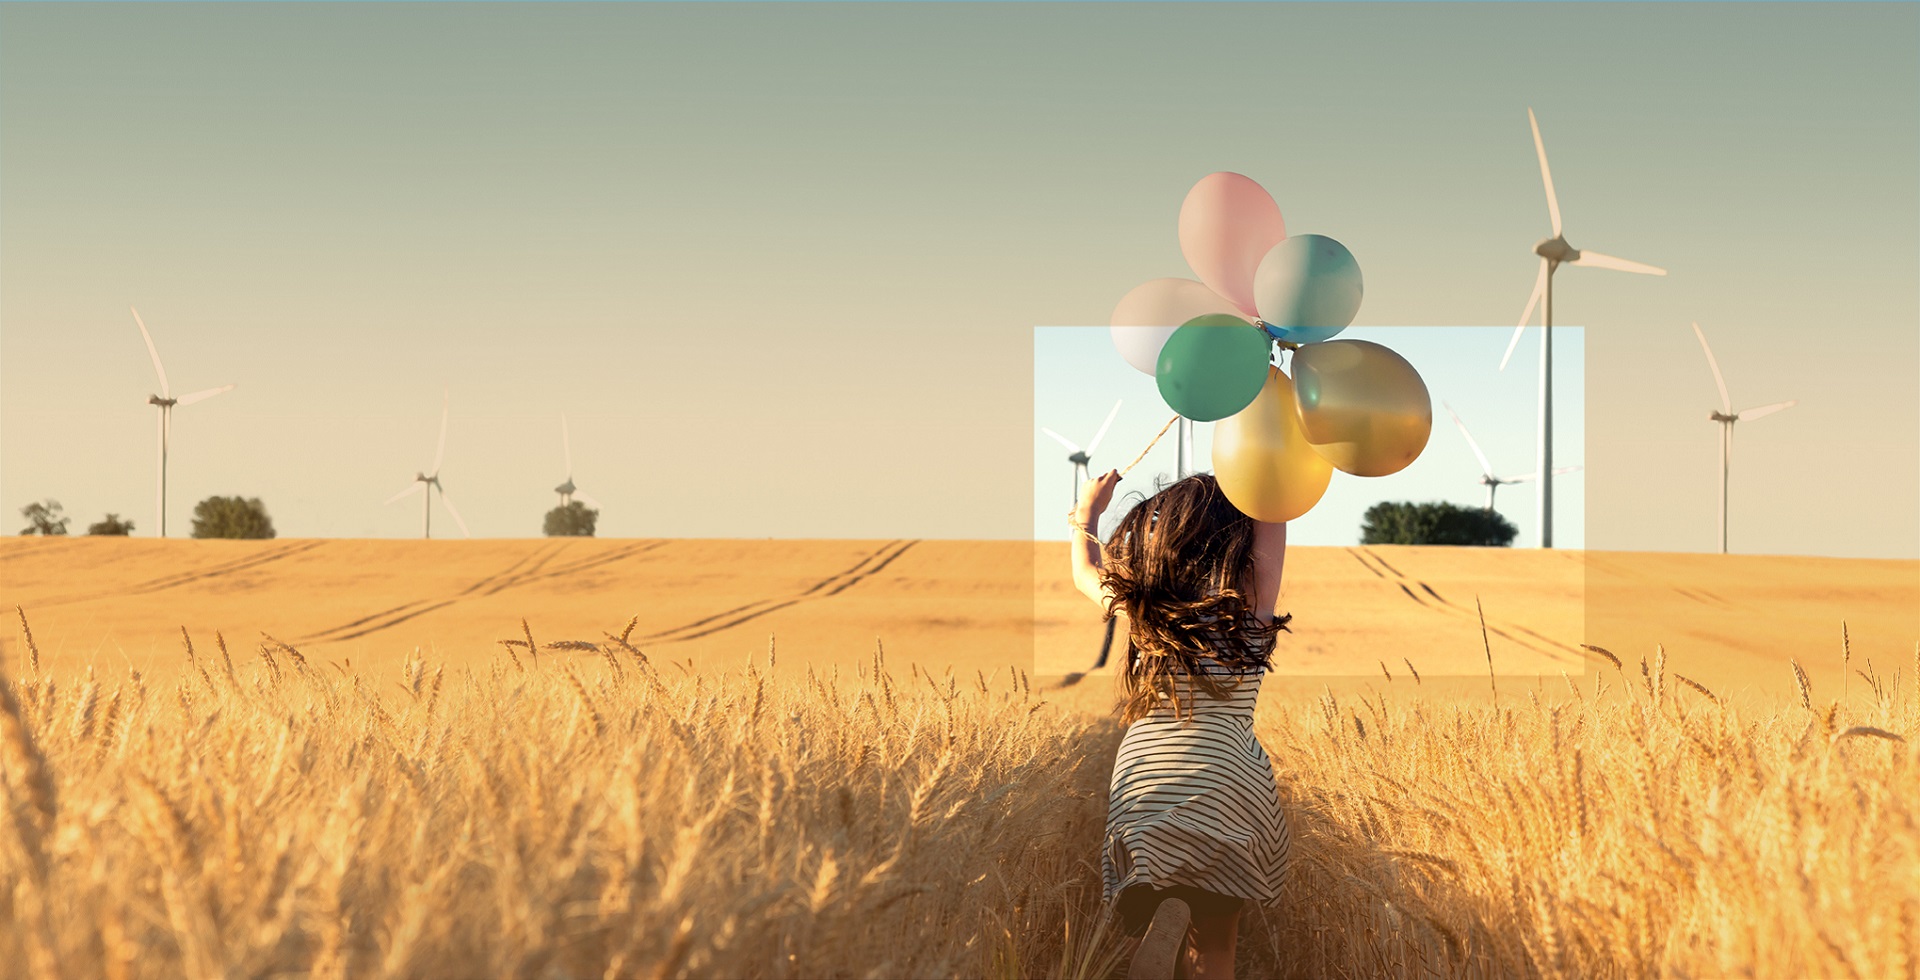 Girl with balloons running through windmill field